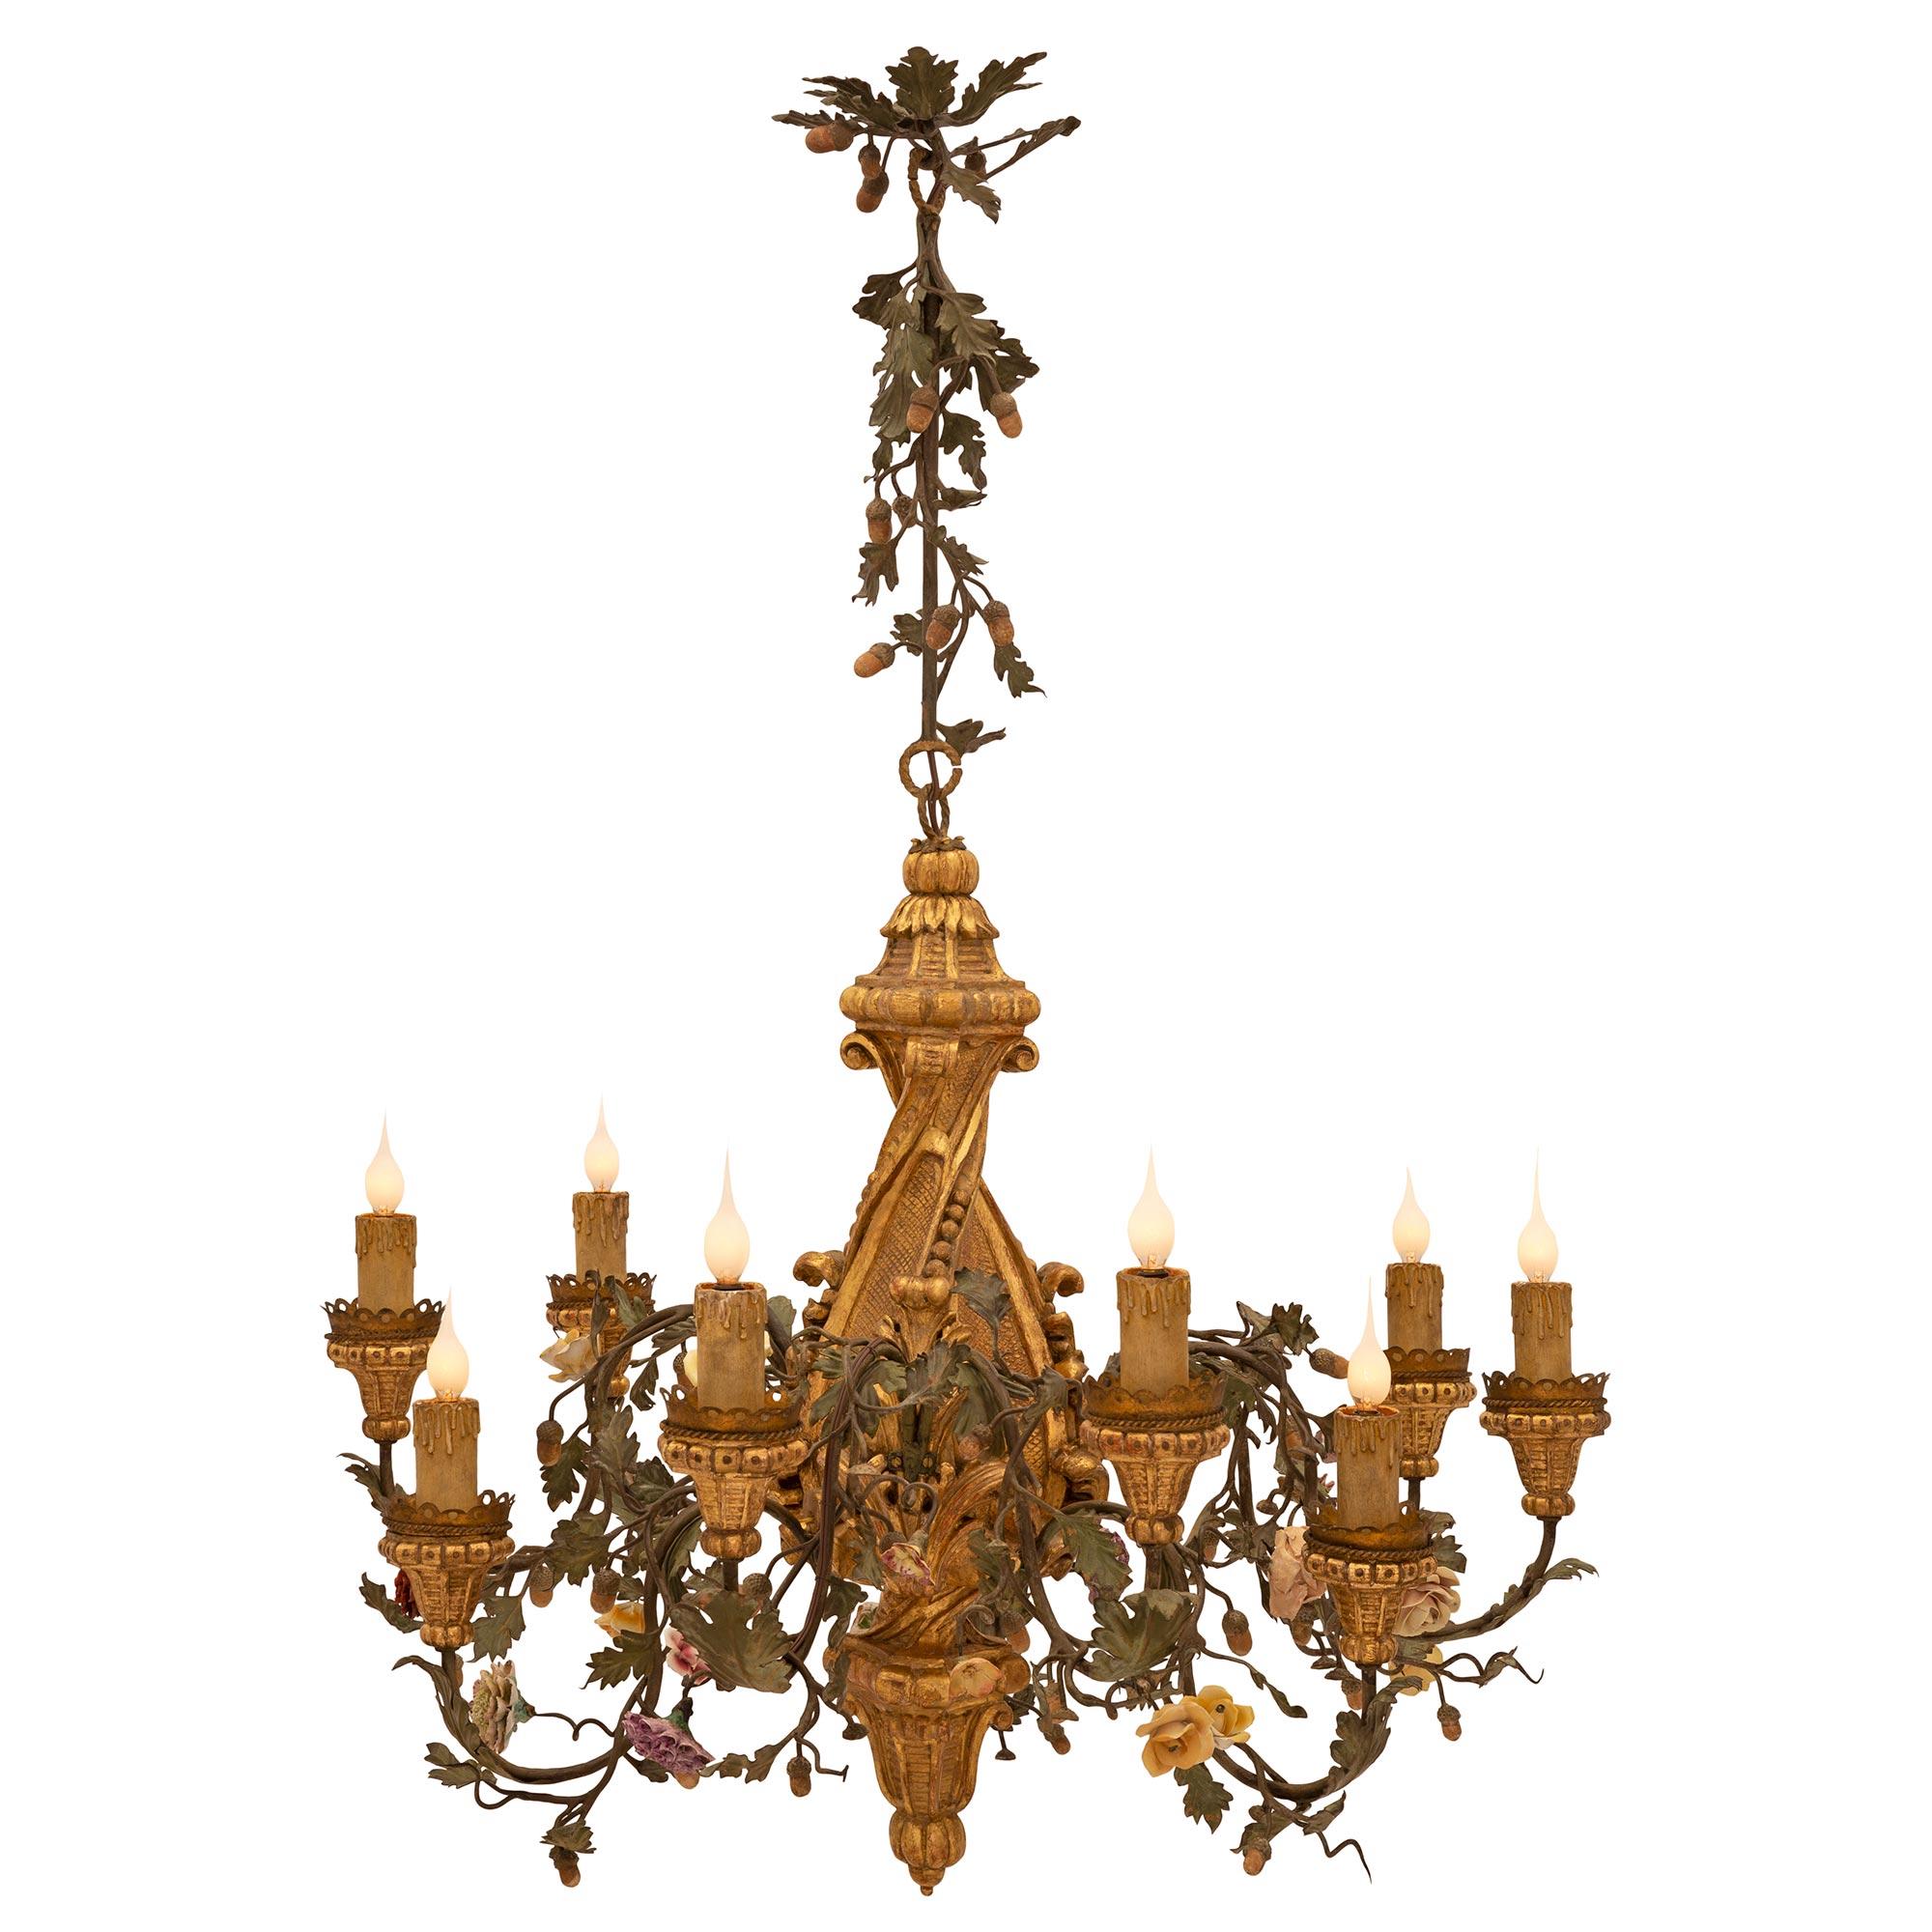 A beautiful and most decorative Italian 19th century giltwood, porcelain, and patinated iron chandelier. The nine arm chandelier is centered by a central charming richly carved inverted giltwood foliate finial below lovely scrolled movements. At the